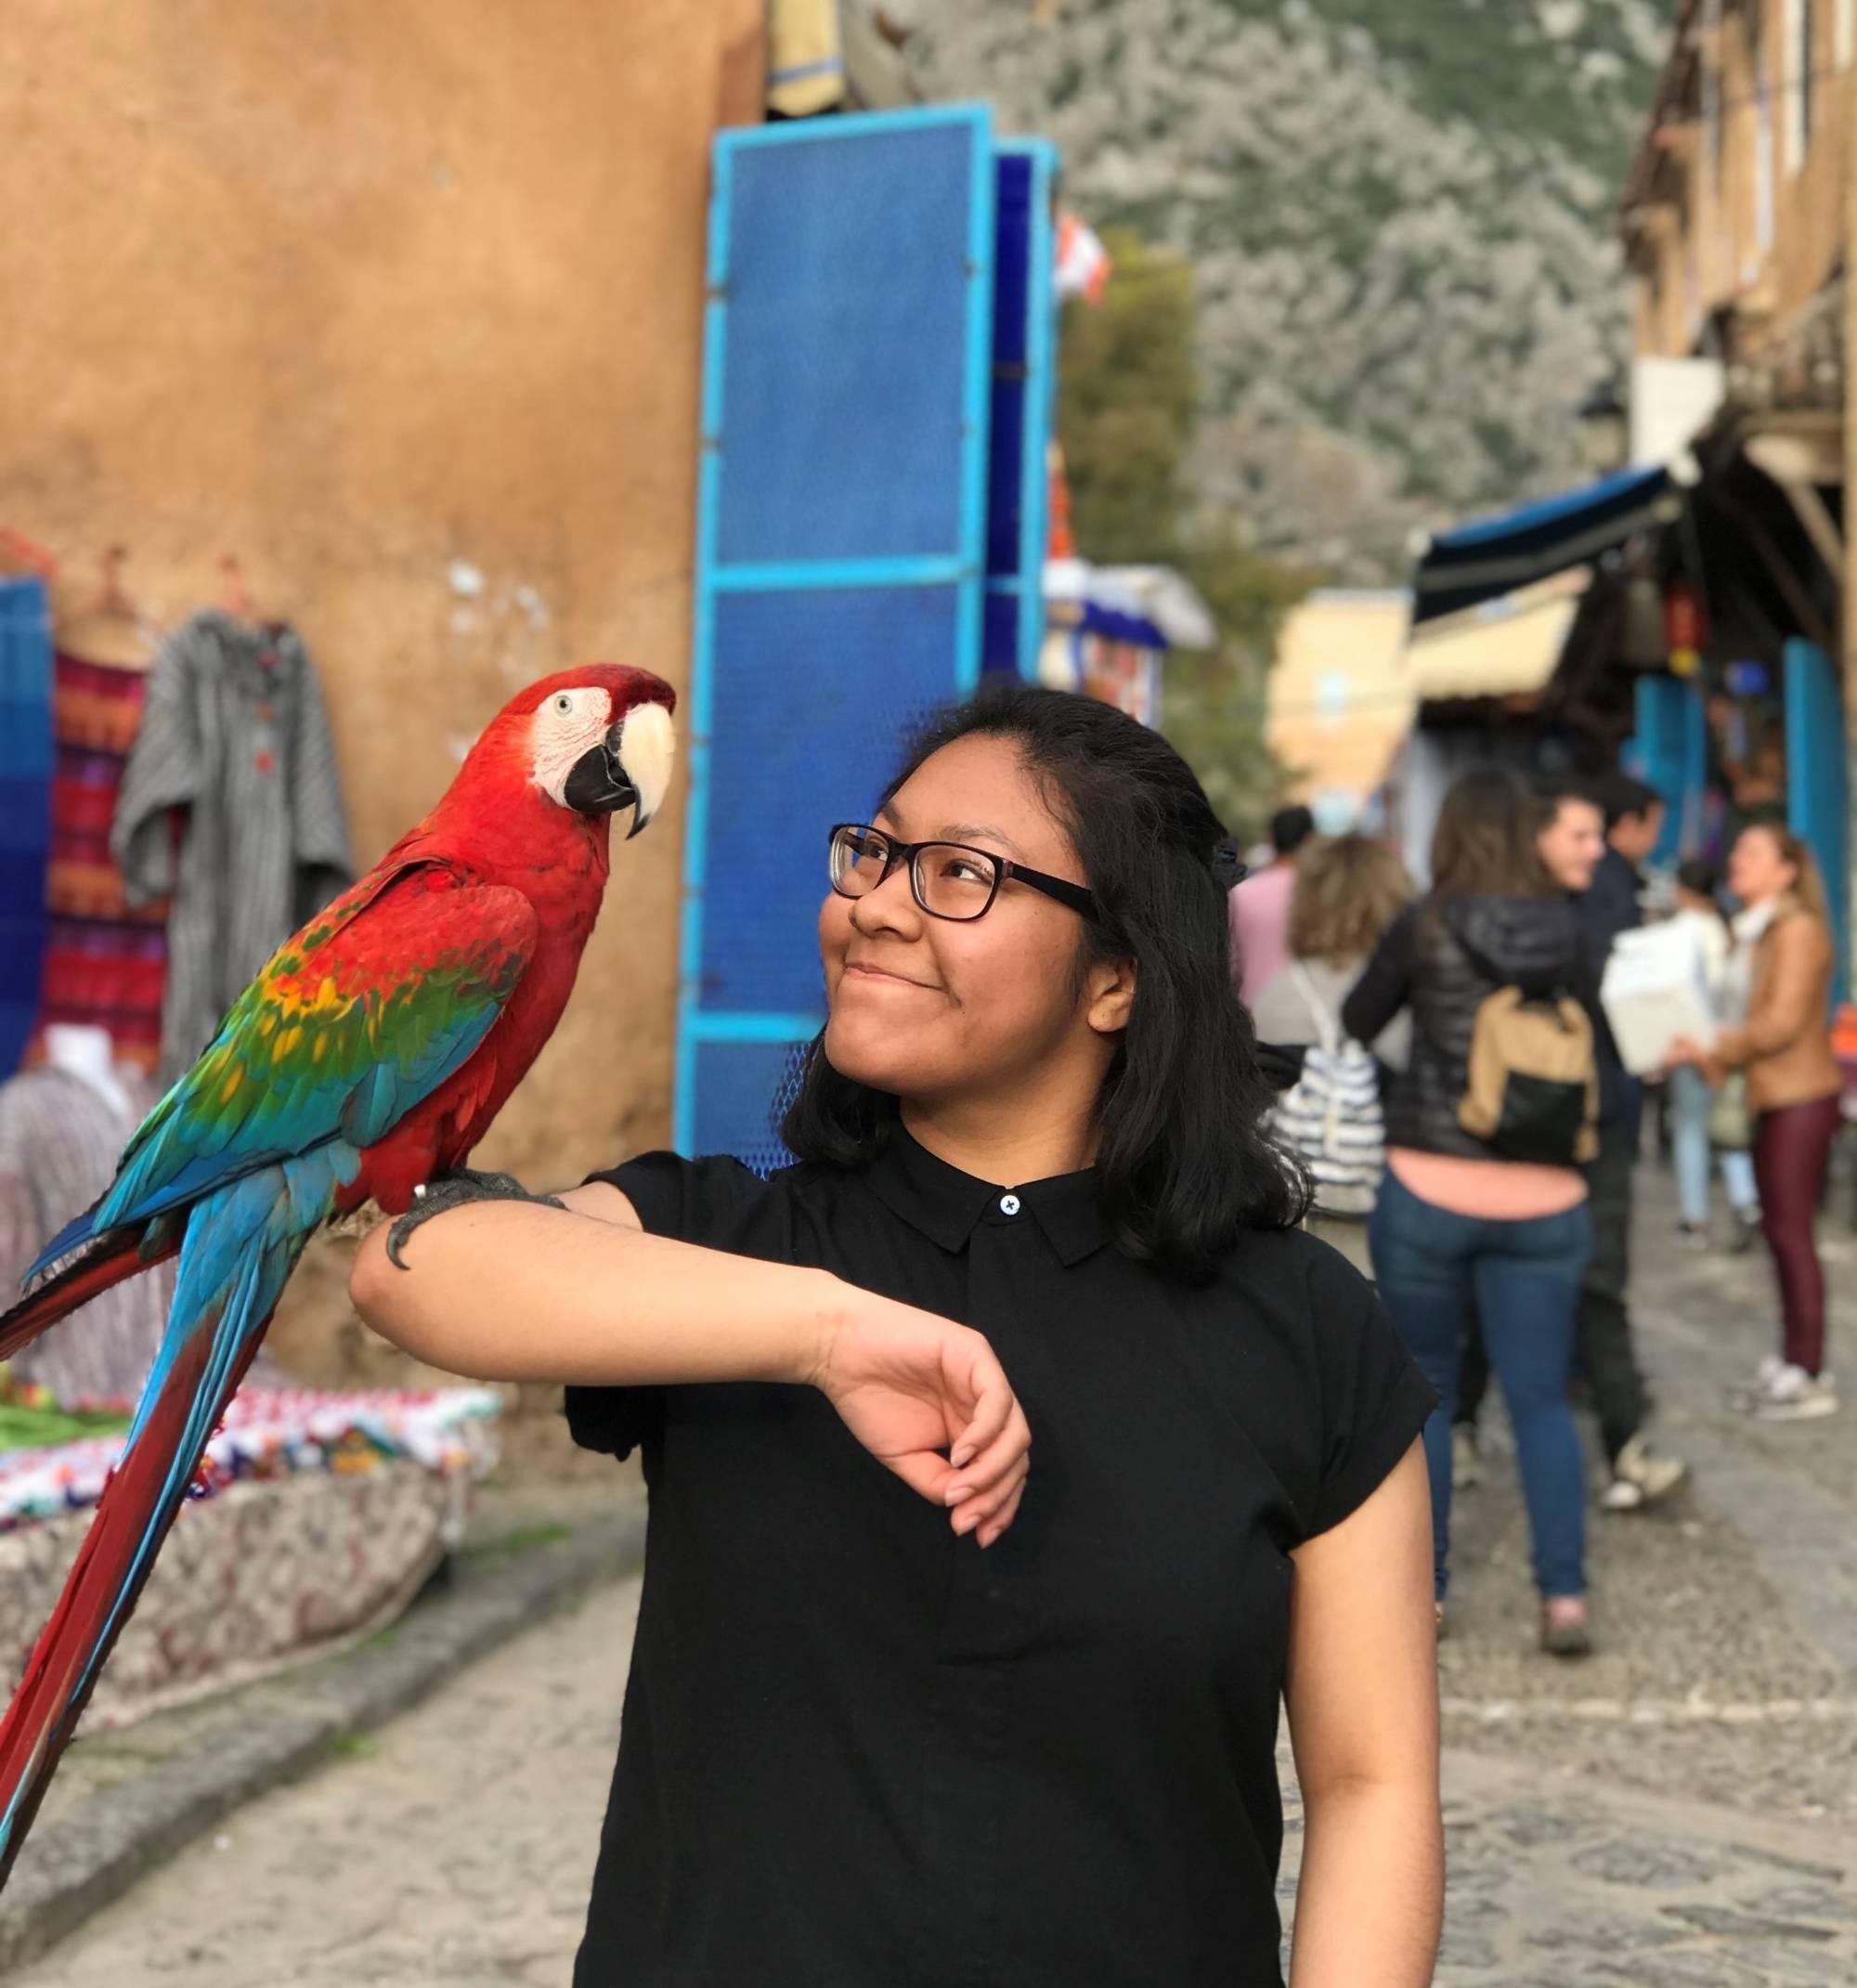 Student with a parrot on their arm in Spain